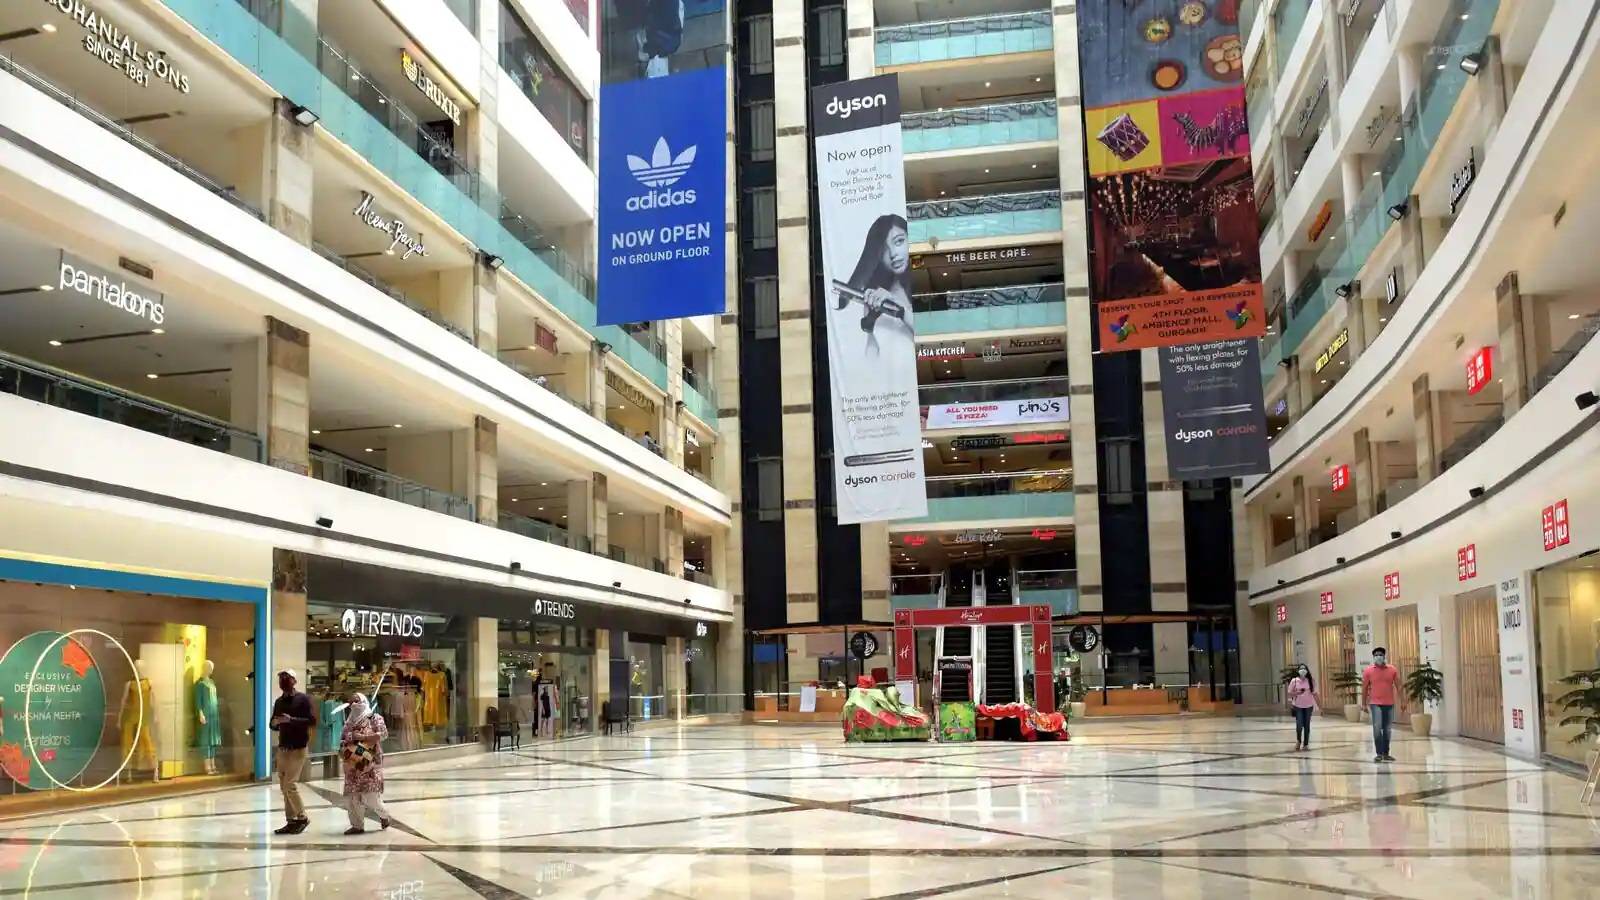 DLF mulls auction bid for Ambience Mall with base price of $366 million Sources